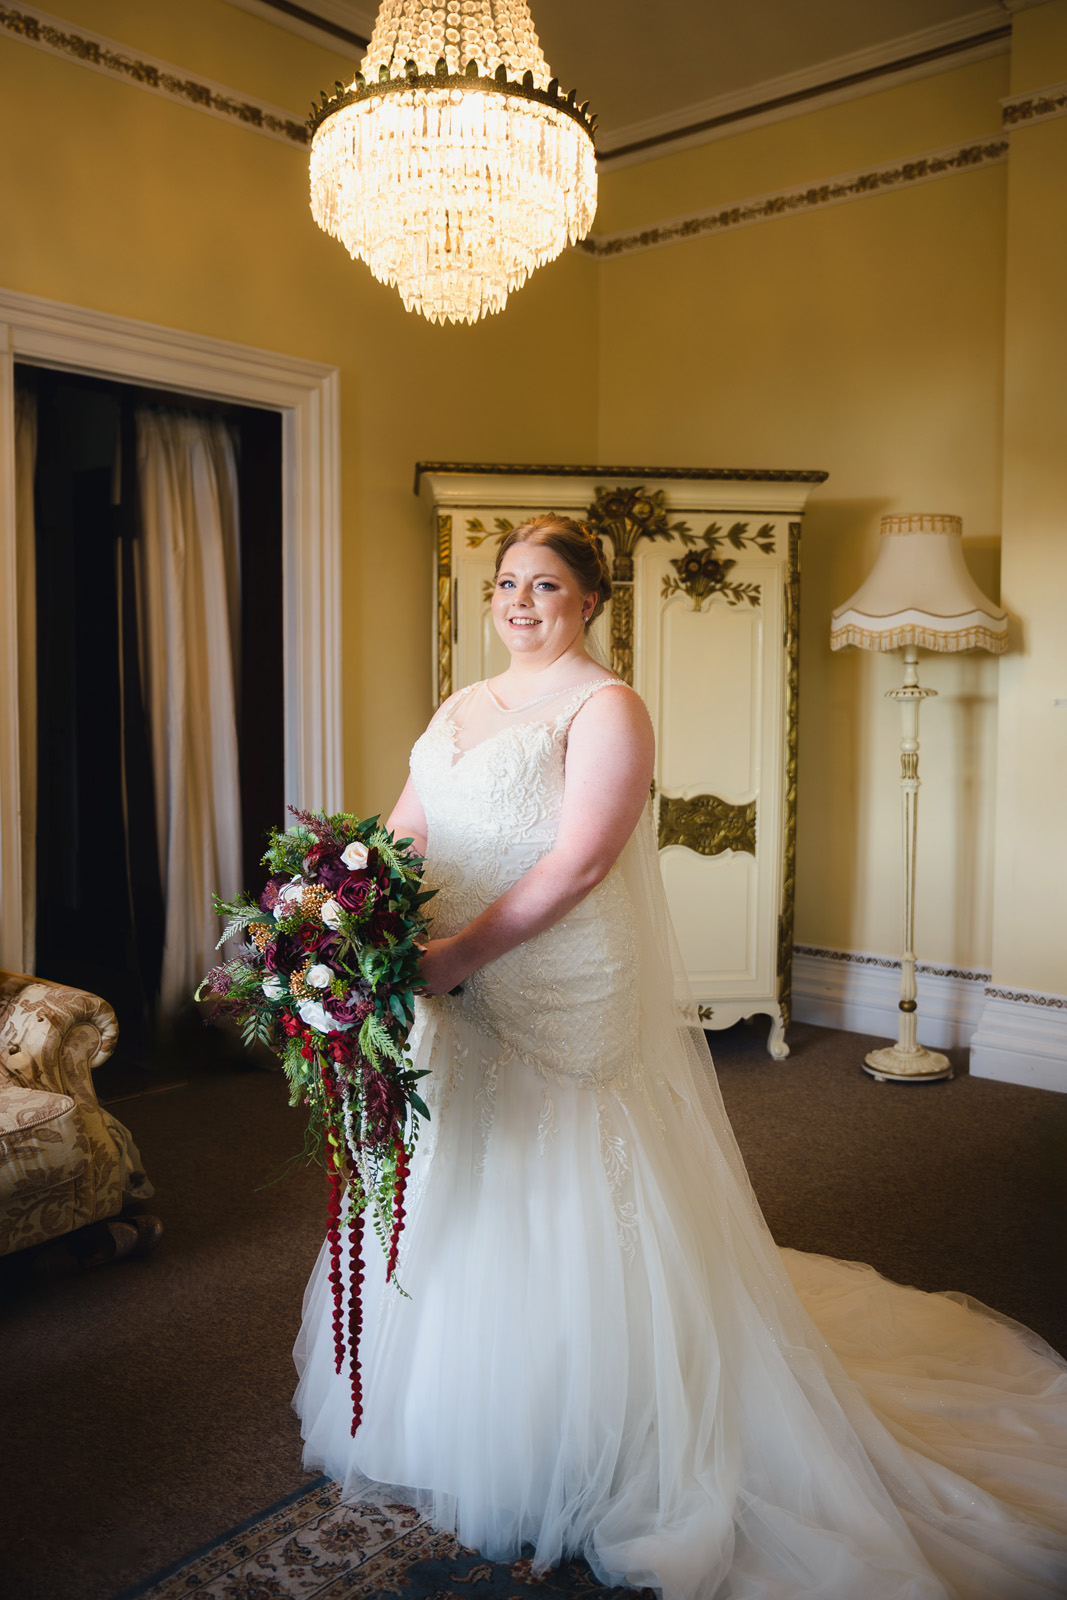 Wedding Photographer at Orchardleigh House